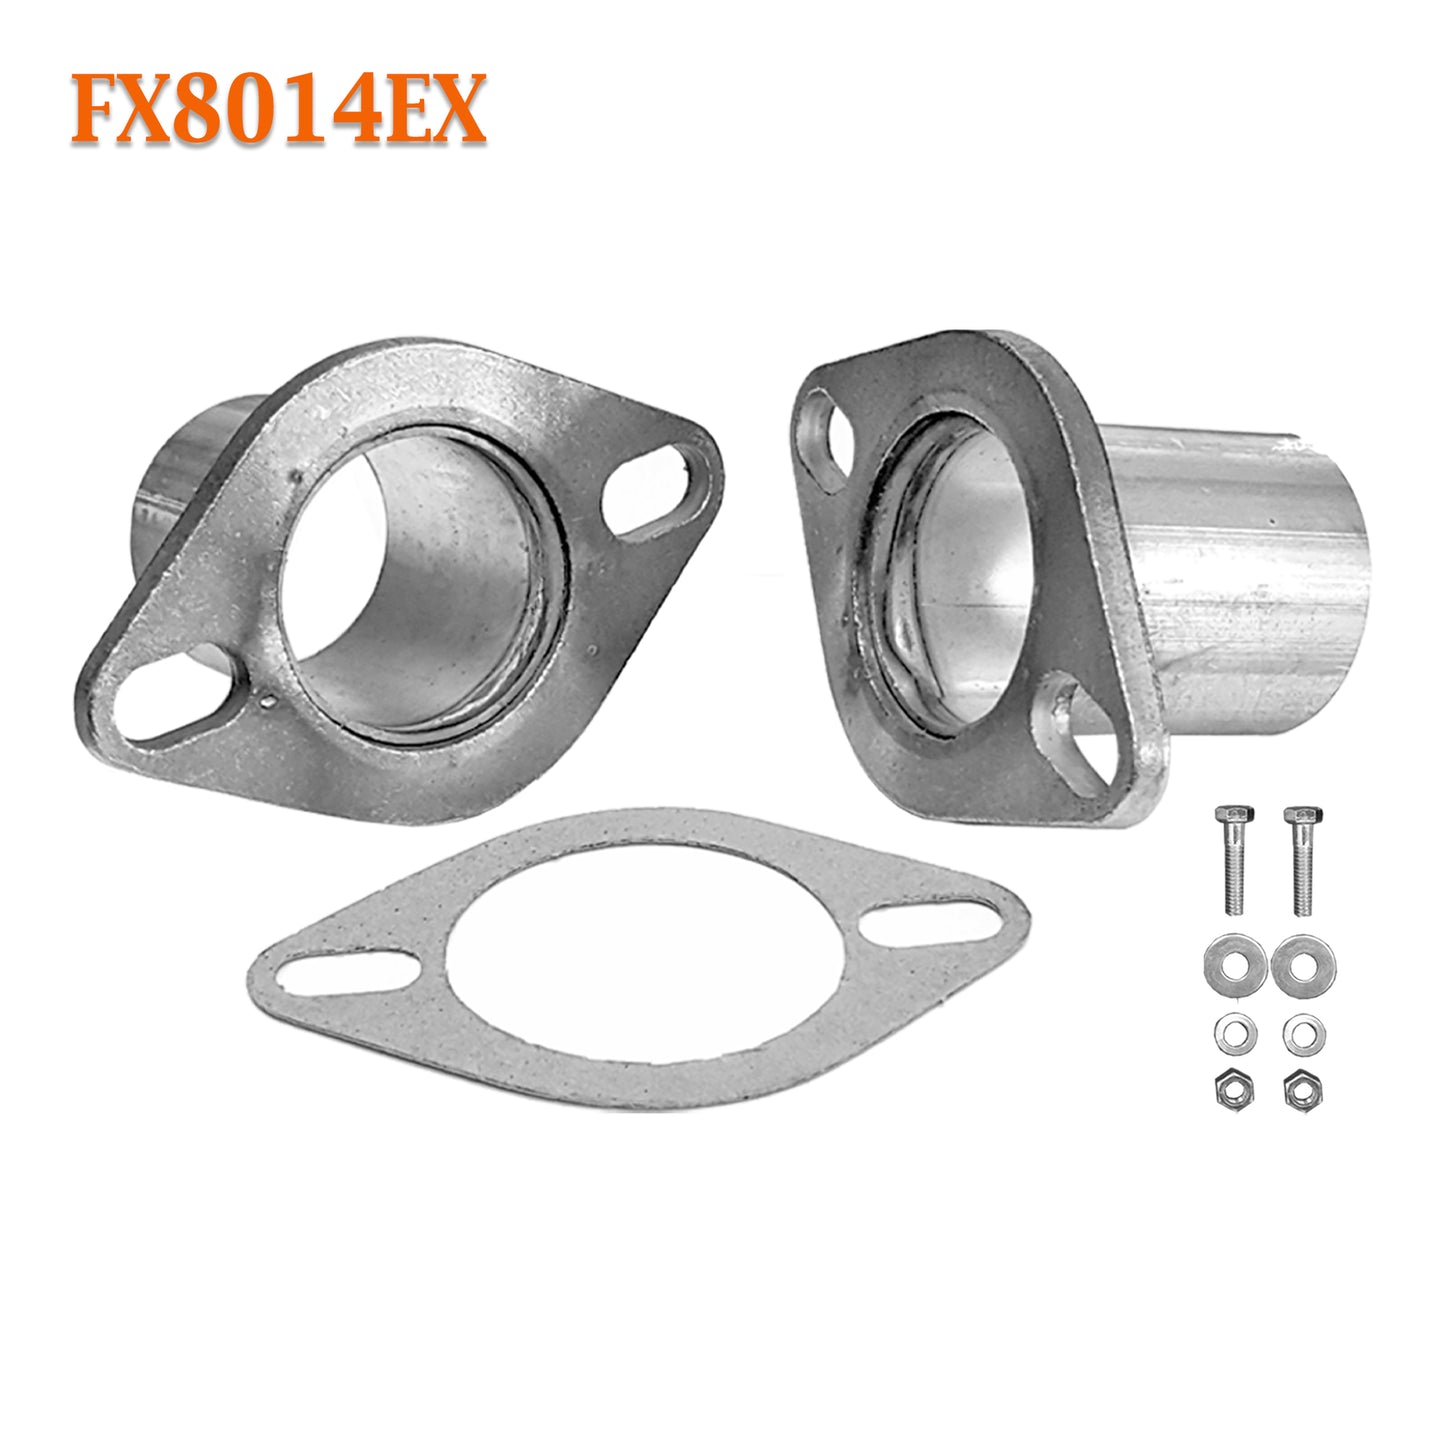 FX8014EX 1 3/4" ID Universal QuickFix Exhaust Oval Flange Repair Pipe Kit Gasket